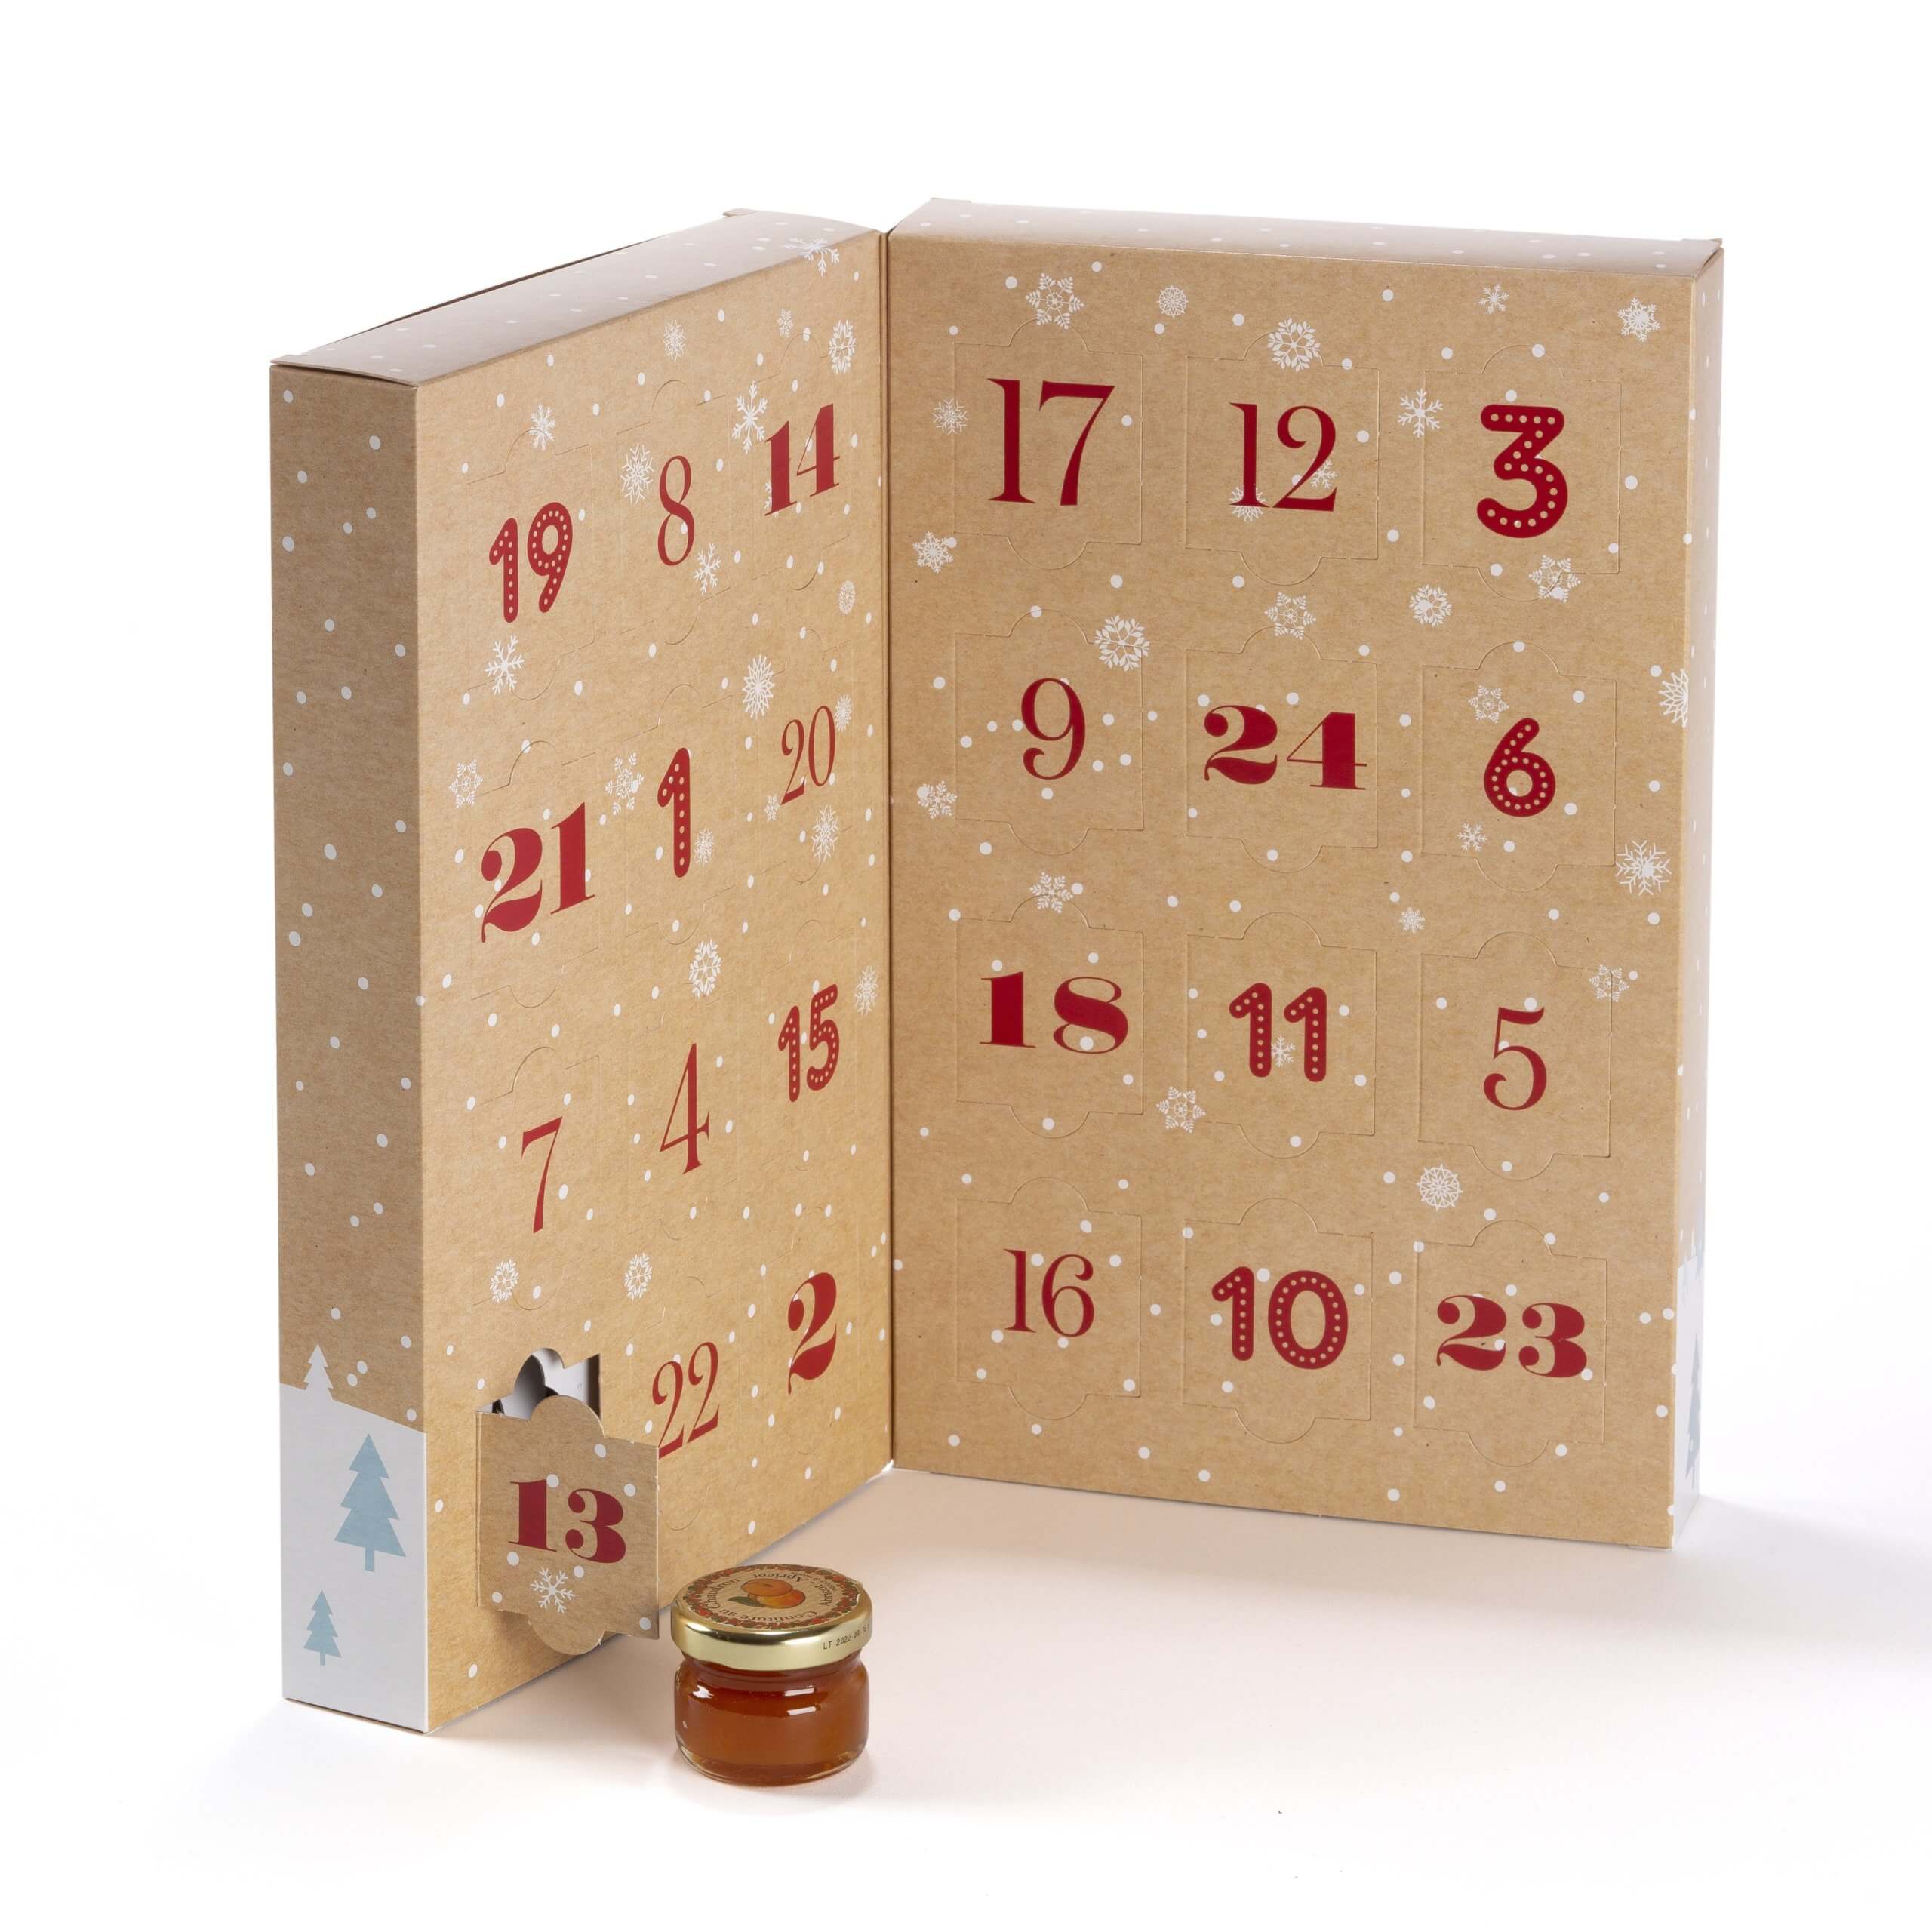 Avent calendar with 24 jam recipes by Andresy Confitures